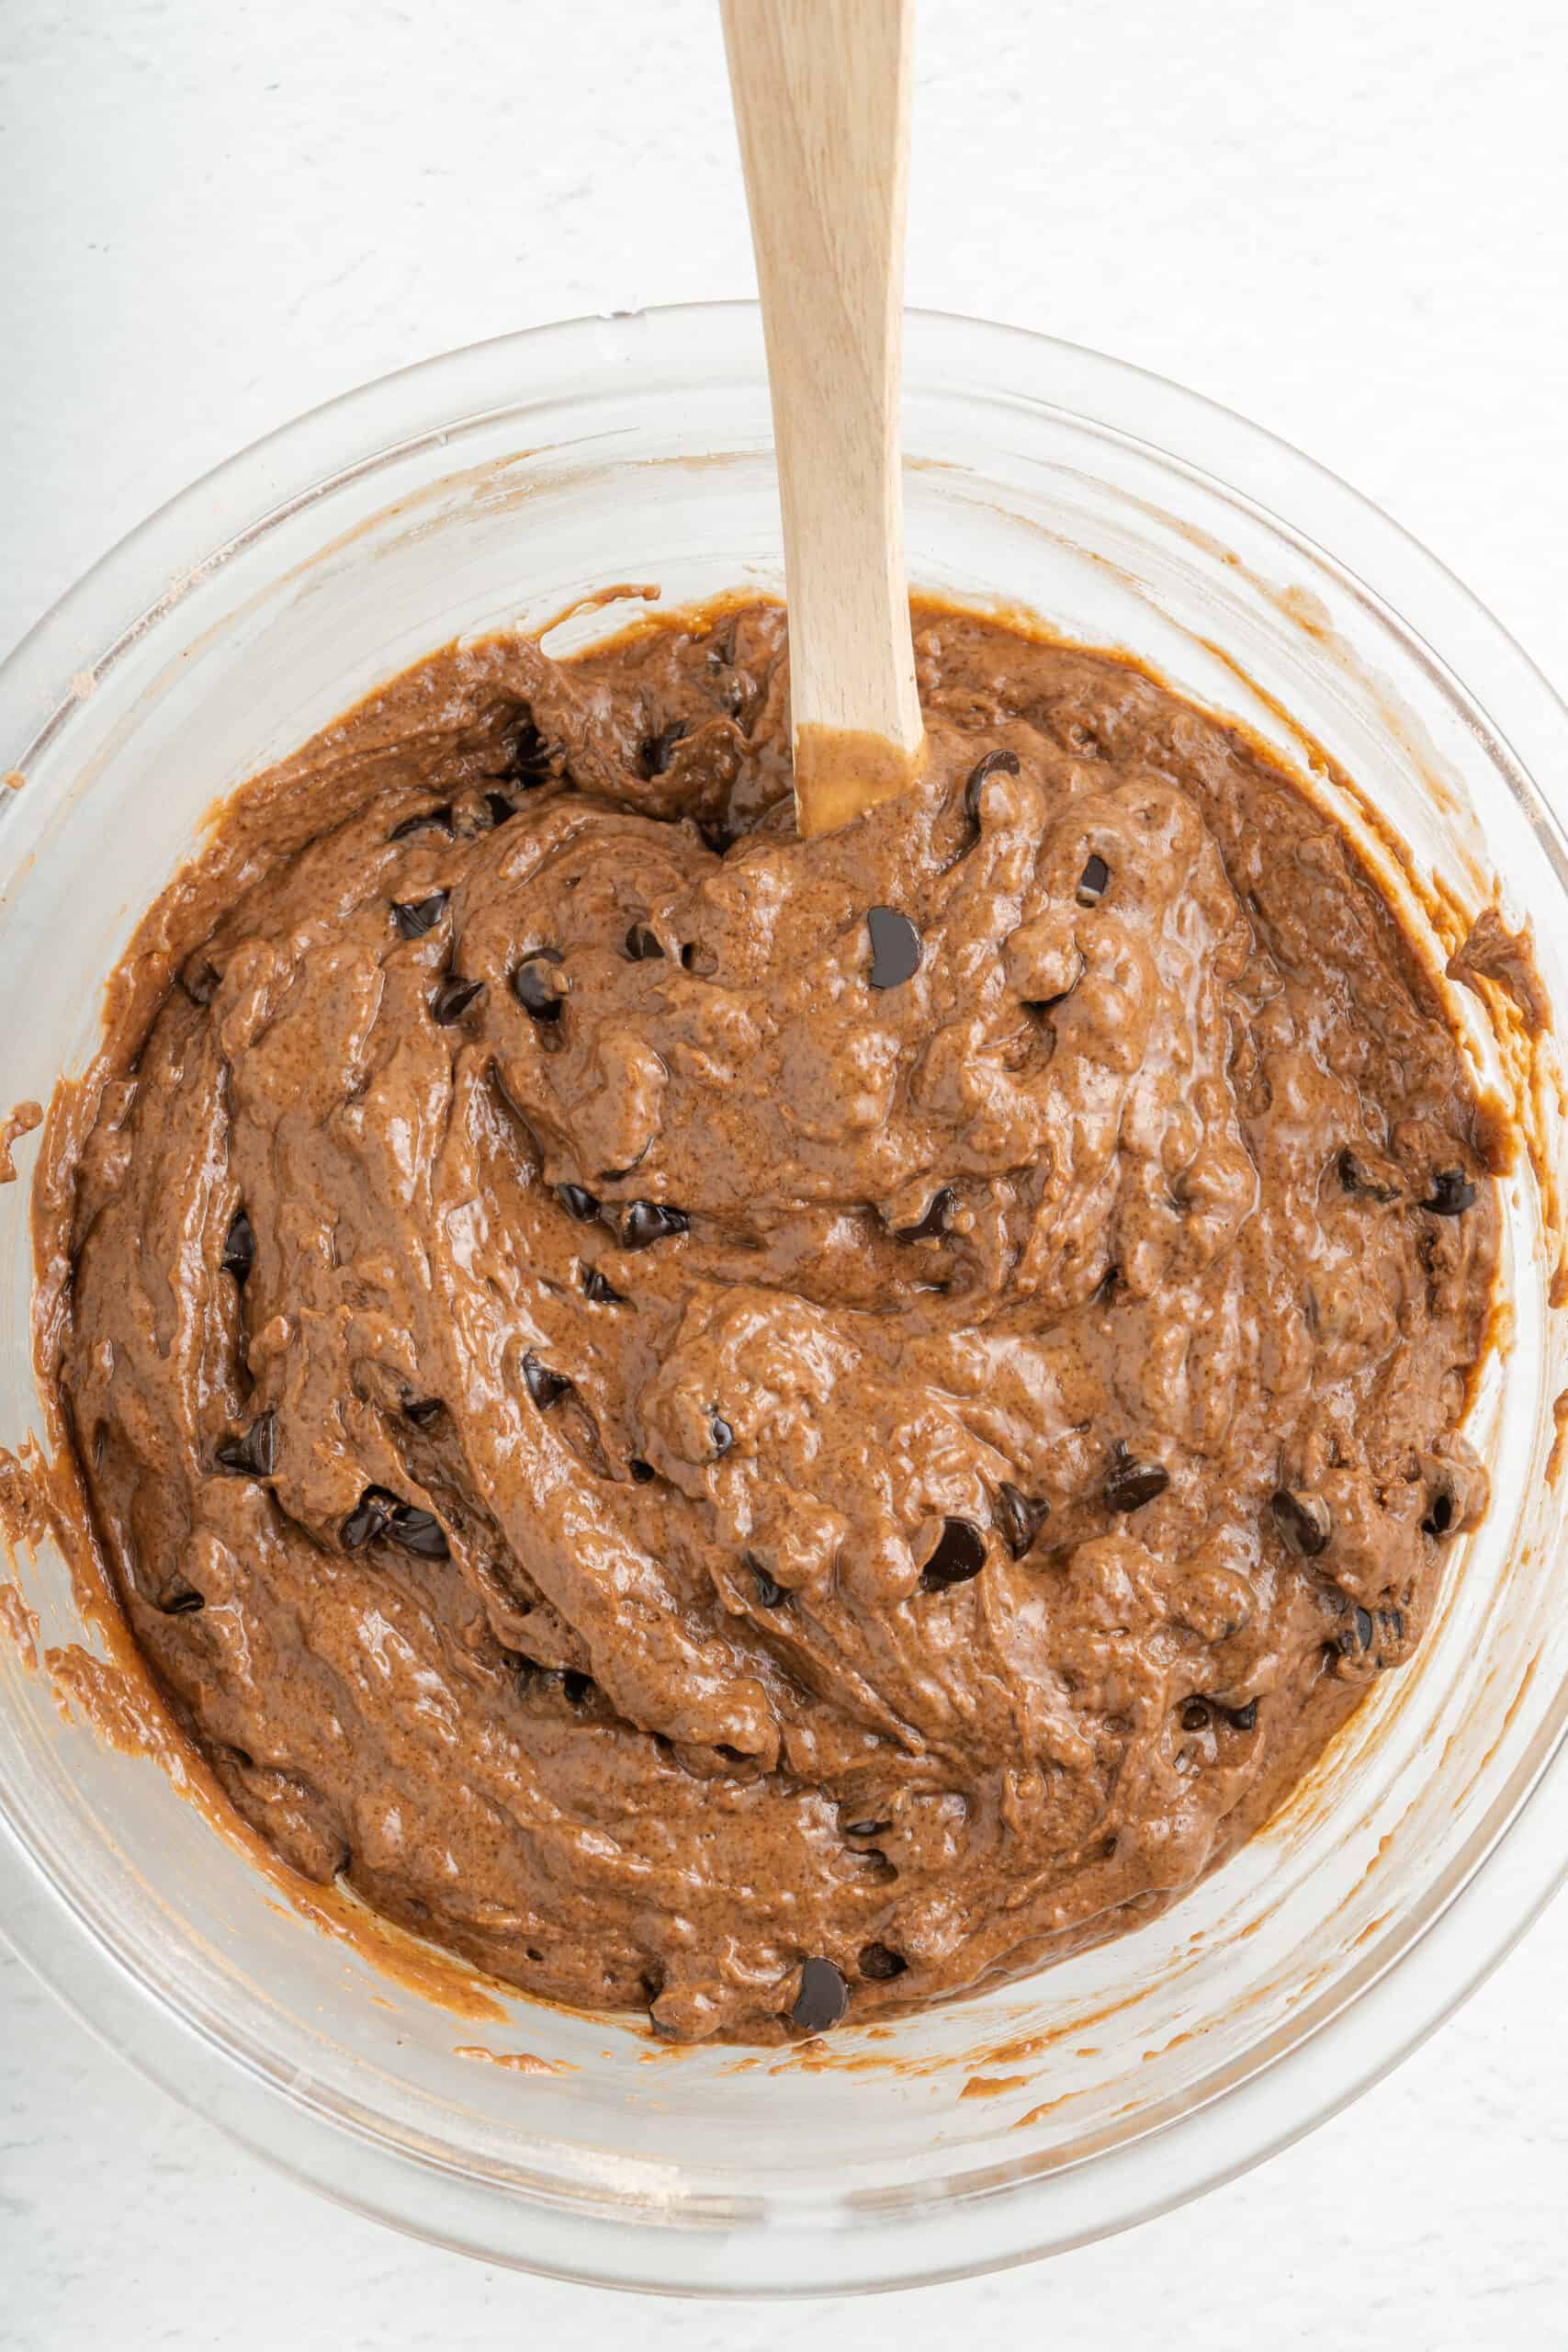 Mixing Double chocolate chip muffins
